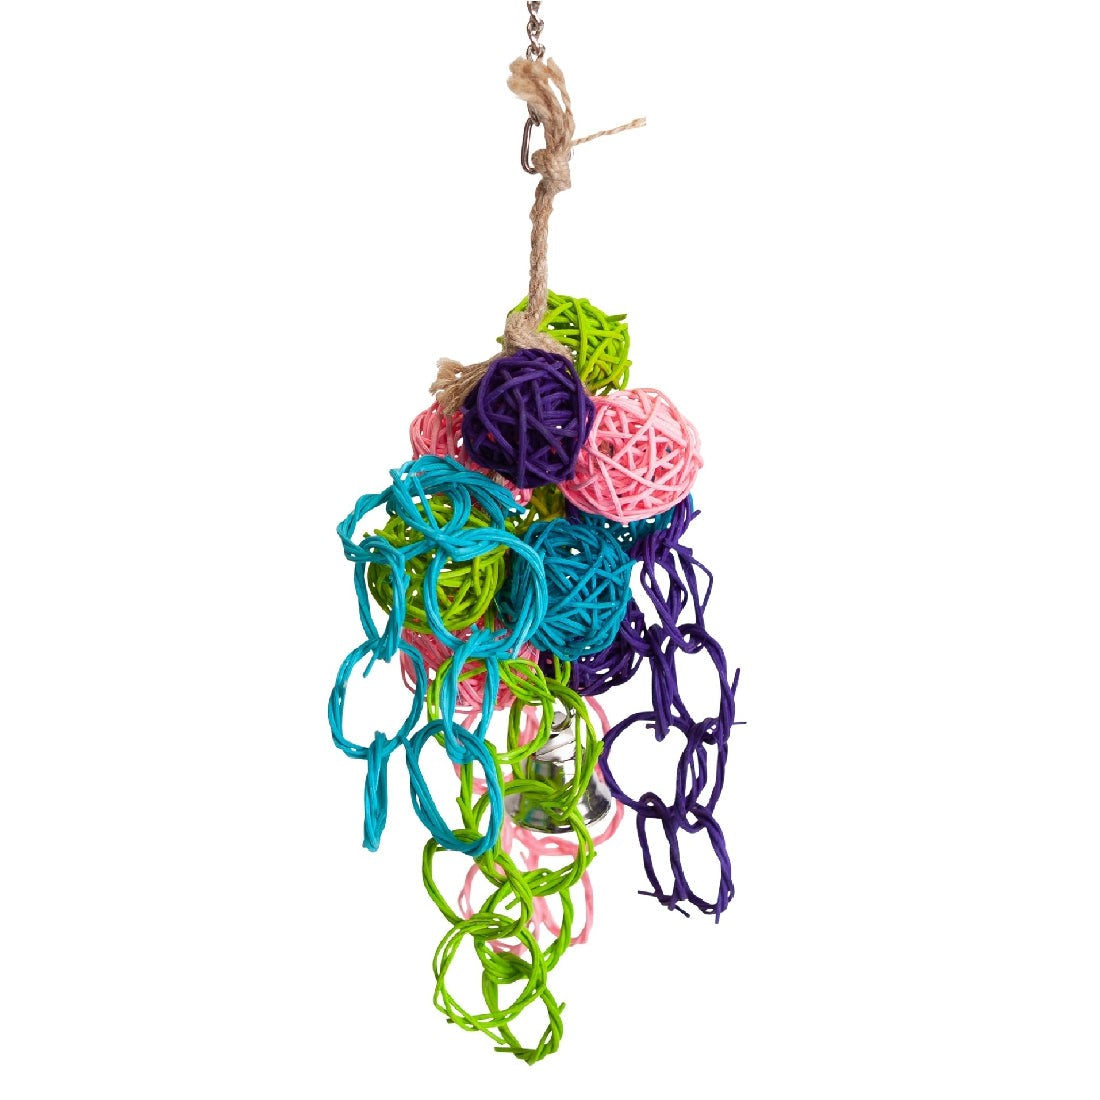 Colorful hanging wicker balls, bird toy with knotted rope.